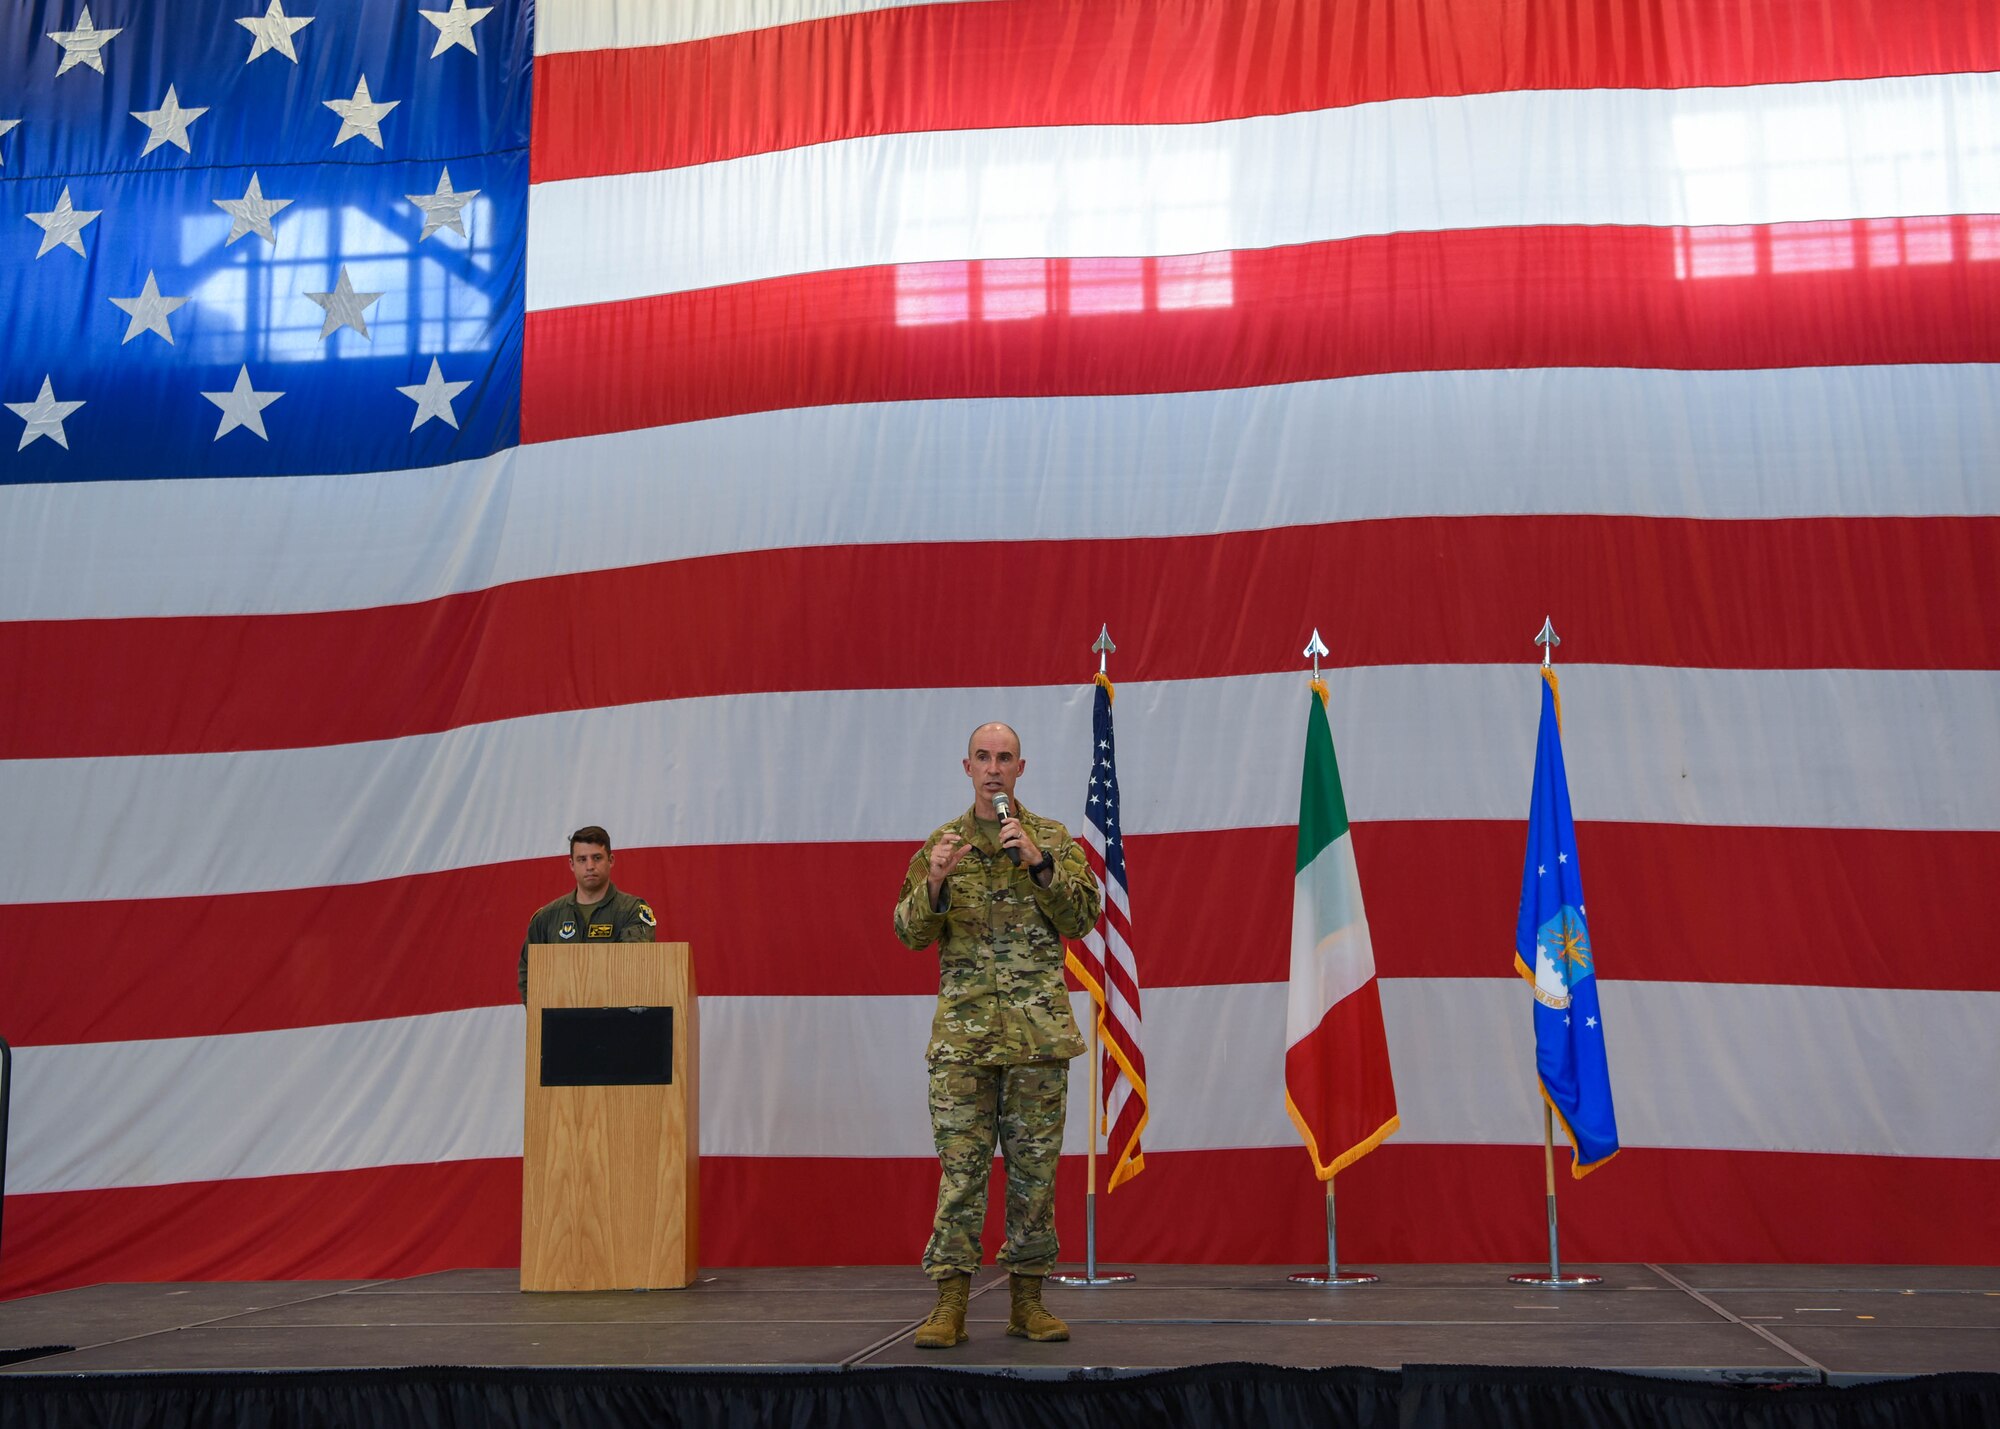 U.S. Air Force Brig. Gen. Jason Bailey, 31st Fighter Wing commander, gives final remarks at his 31st FW final all-call at Aviano Air Base, Italy, June 30, 2022. Bailey is scheduled to have his change of command ceremony July 18, 2022. The wing’s diverse mission sets are executed by Airmen that fly, maintain and support two F-16C Fighting Falcon fighter squadrons, two combat search and rescue squadrons with pararescue Airmen and HH-60 Pave Hawks, U.S. Air Forces Europe’s only air control squadron, agile combat support squadrons, medical squadrons and numerous wing staff agencies. (U.S. Air Force photo by Senior Airman Brooke Moeder)